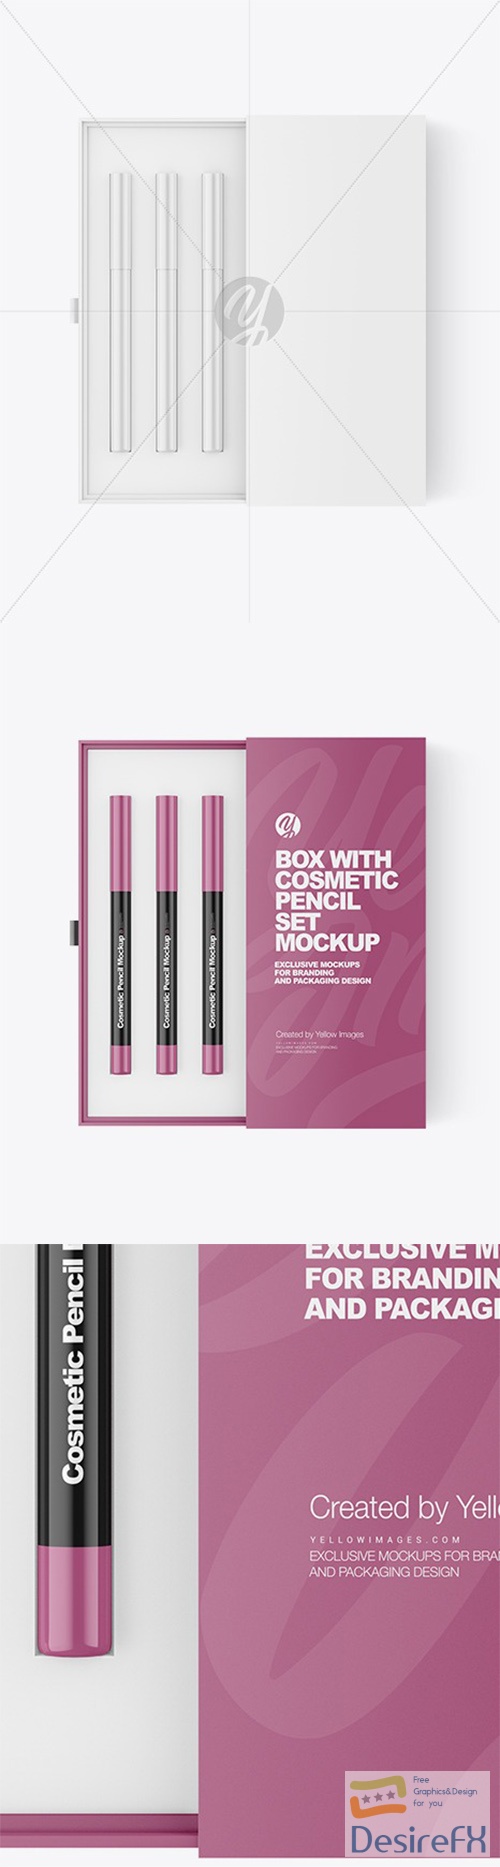 Box with Cosmetic Pencil Set Mockup 95504